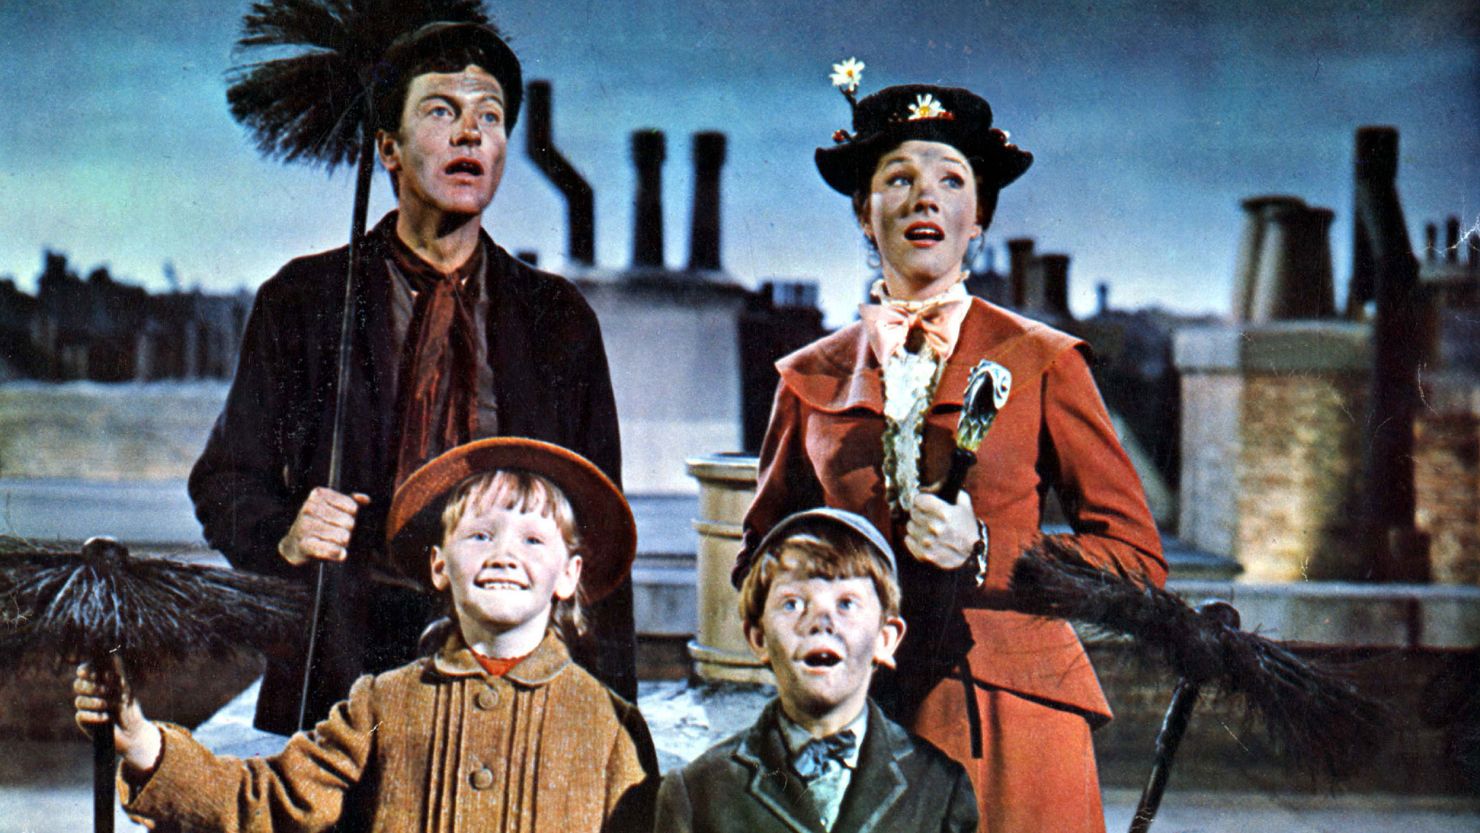 "Mary Poppins," which was rated U for Universal upon its 1964 release, is now rated PG in the UK because of its use of a racial slur.